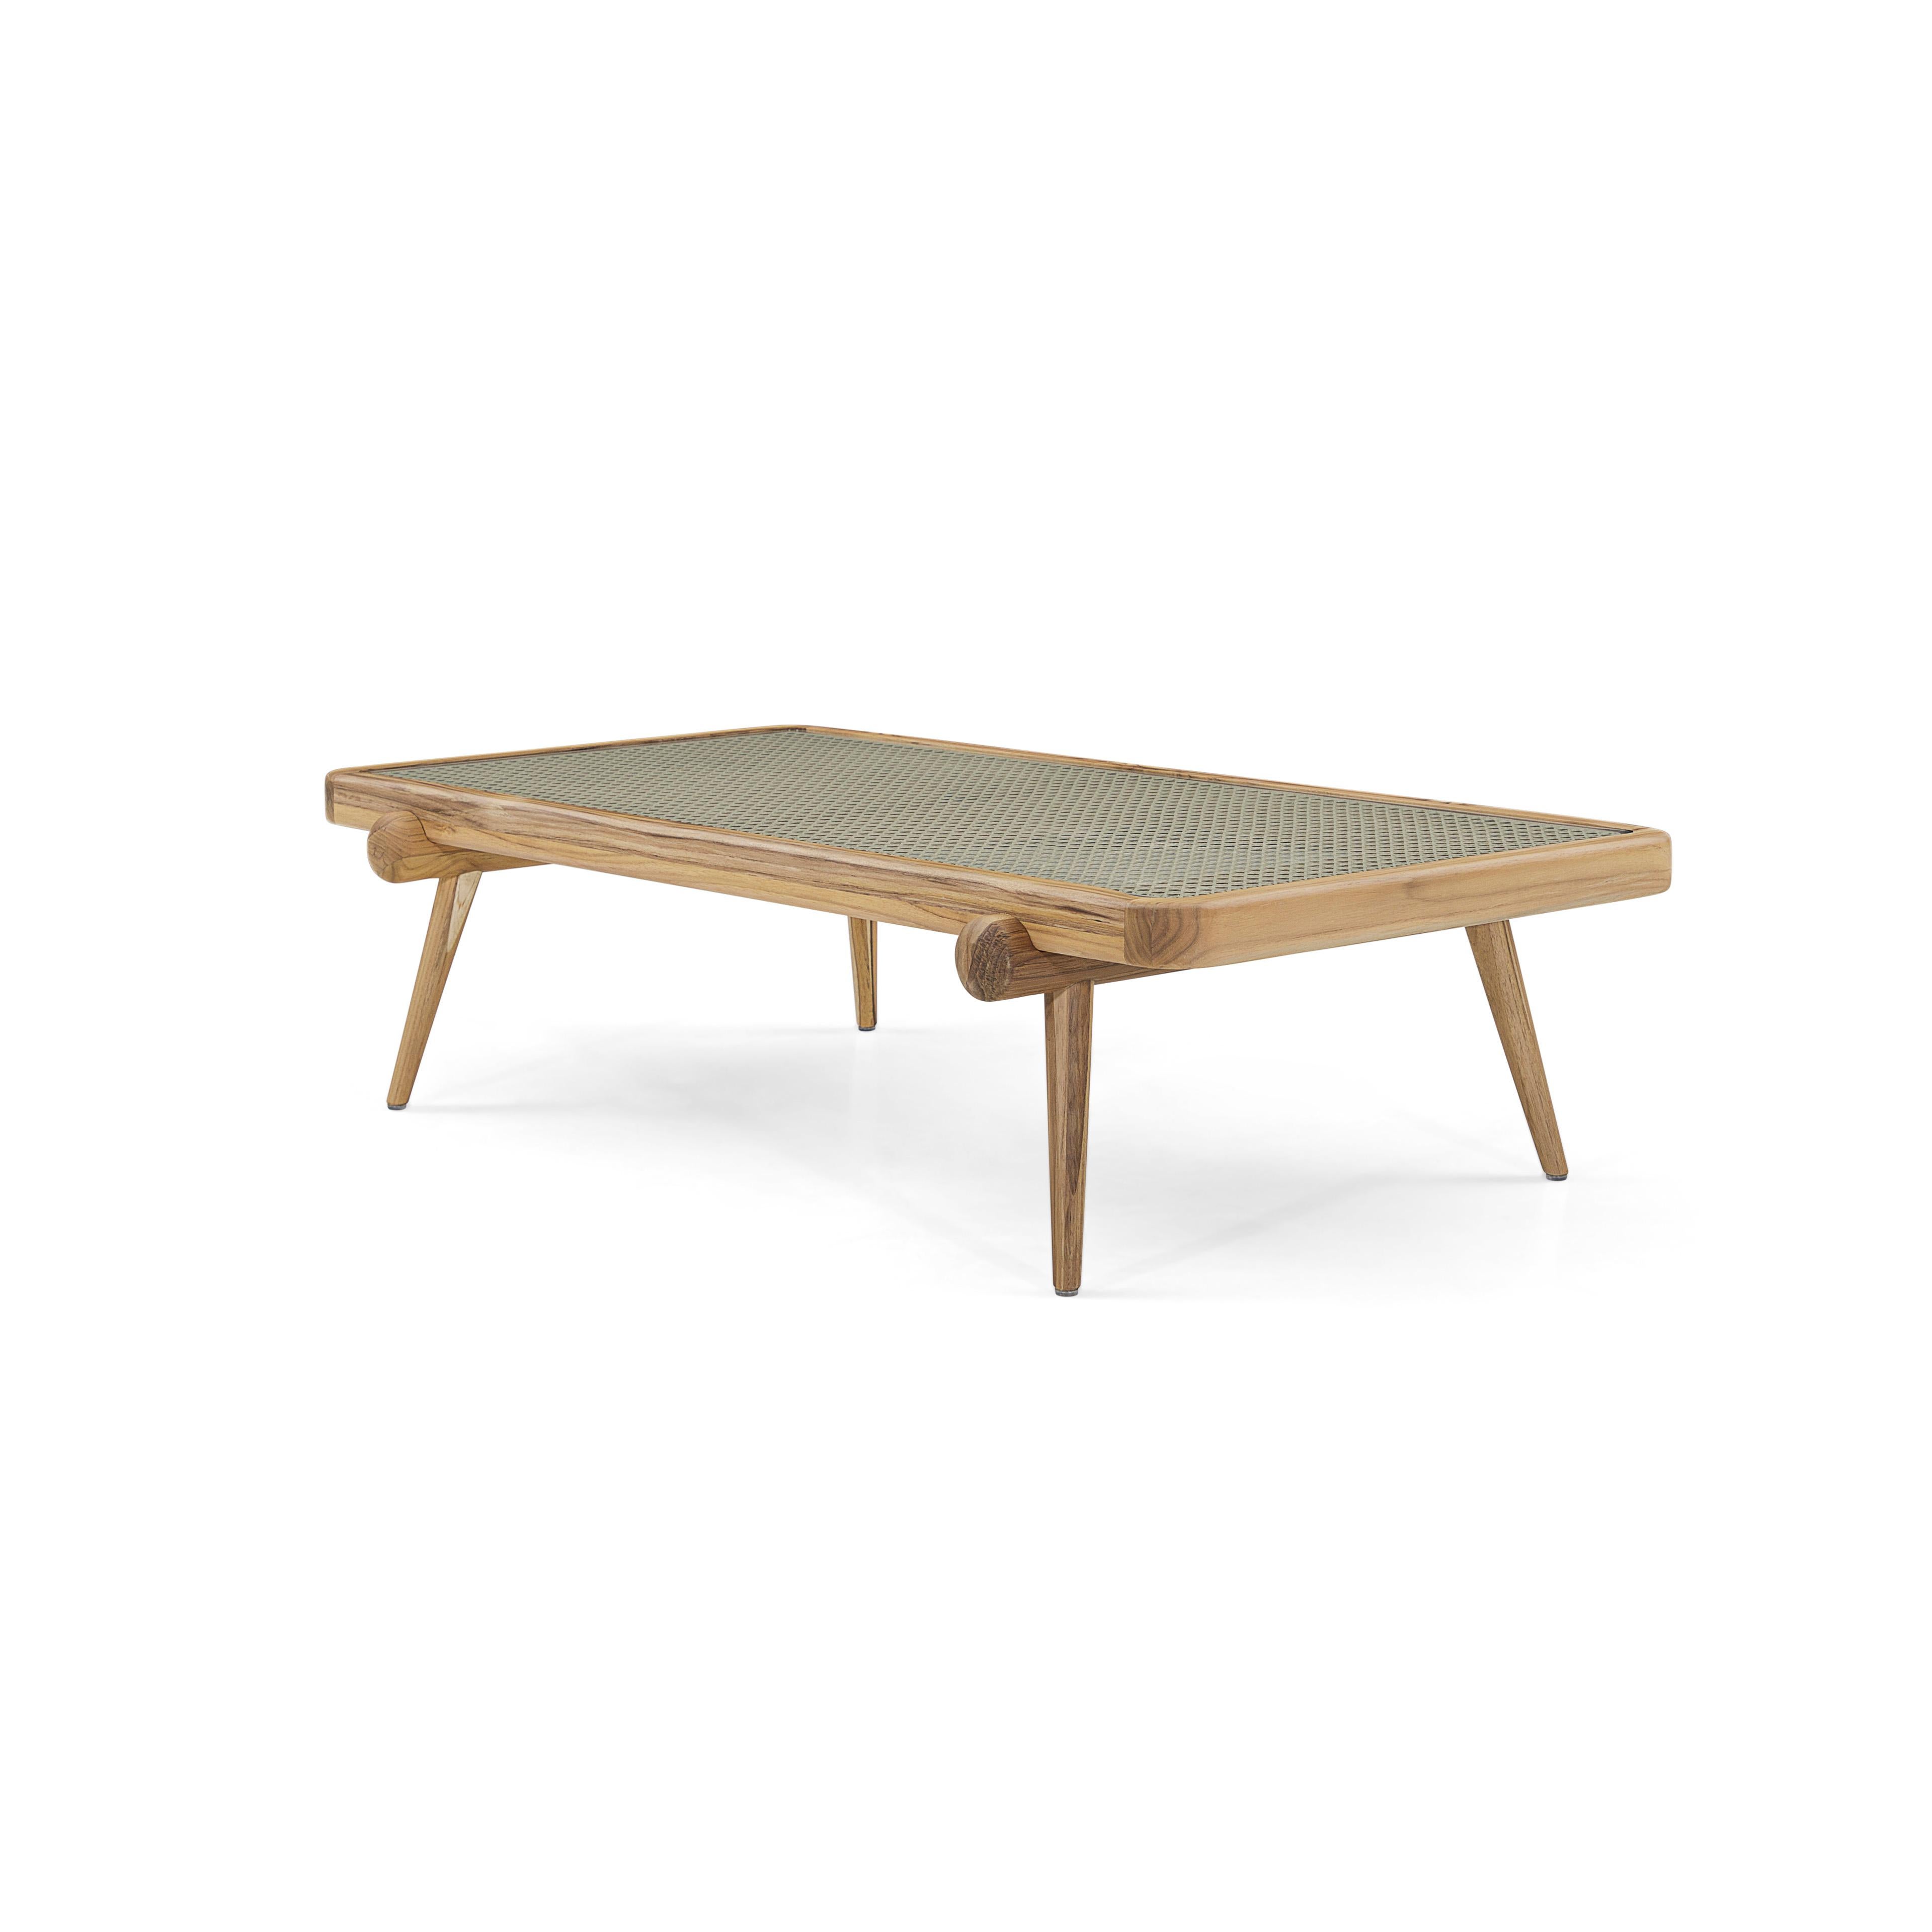 The Plot coffee table, featuring a beautiful teak wood finish frame combined with a cane webbing under a colorless tempered glass top, is another perfect Uultis addition to anyone's home. Our Brazilian team at Uultis designed this coffee table